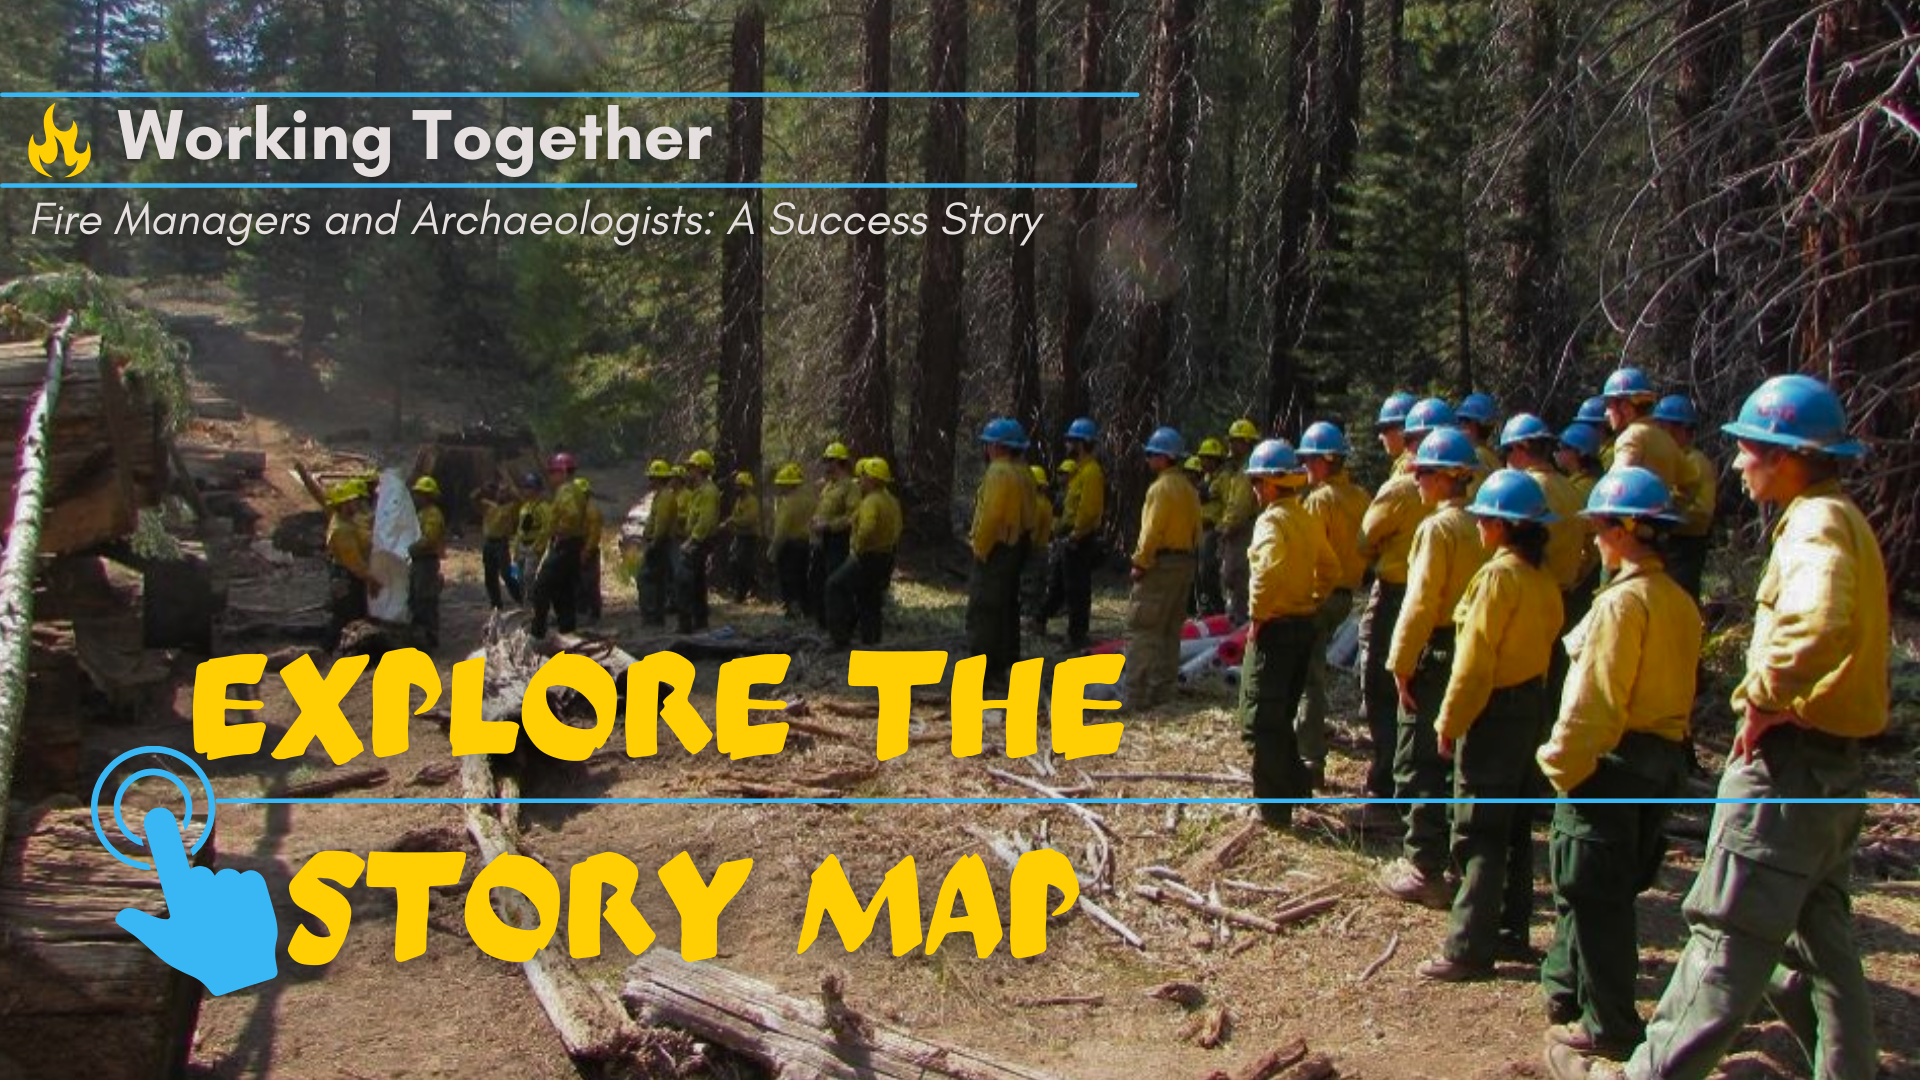 A group of individuals in yellow shirts and blue hardhats observe fire management techniques. Image text reads "Working together: Fire Managers and Archaeologists, a Success Story" and "Explore the Story Map"